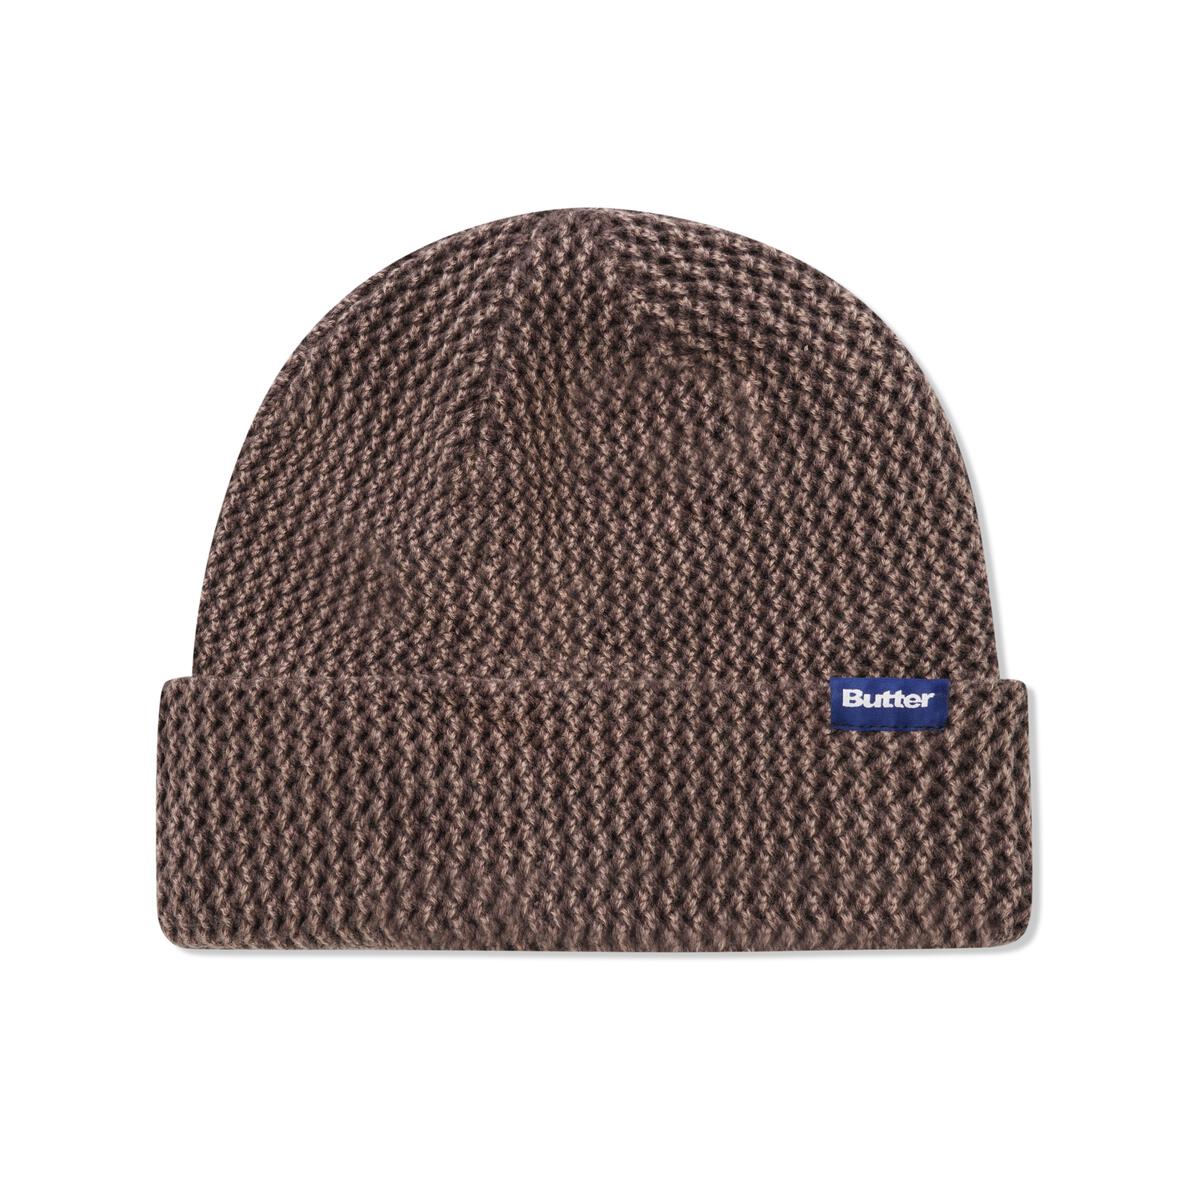 BUTTERGOODS DYED BEANIE WASHED BROWN